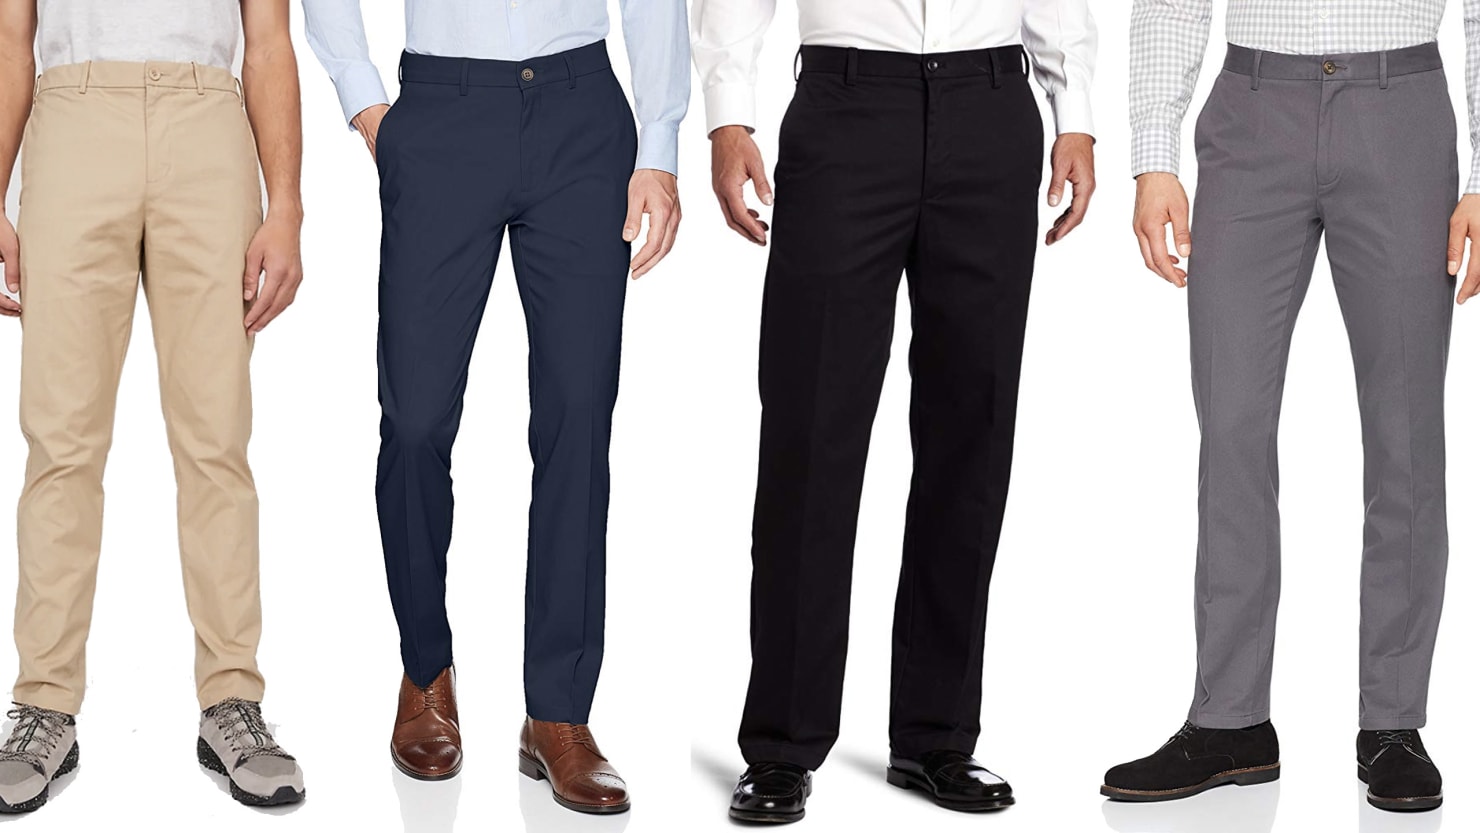 The Best Men’s Chinos to Add to Your Outfit Rotation